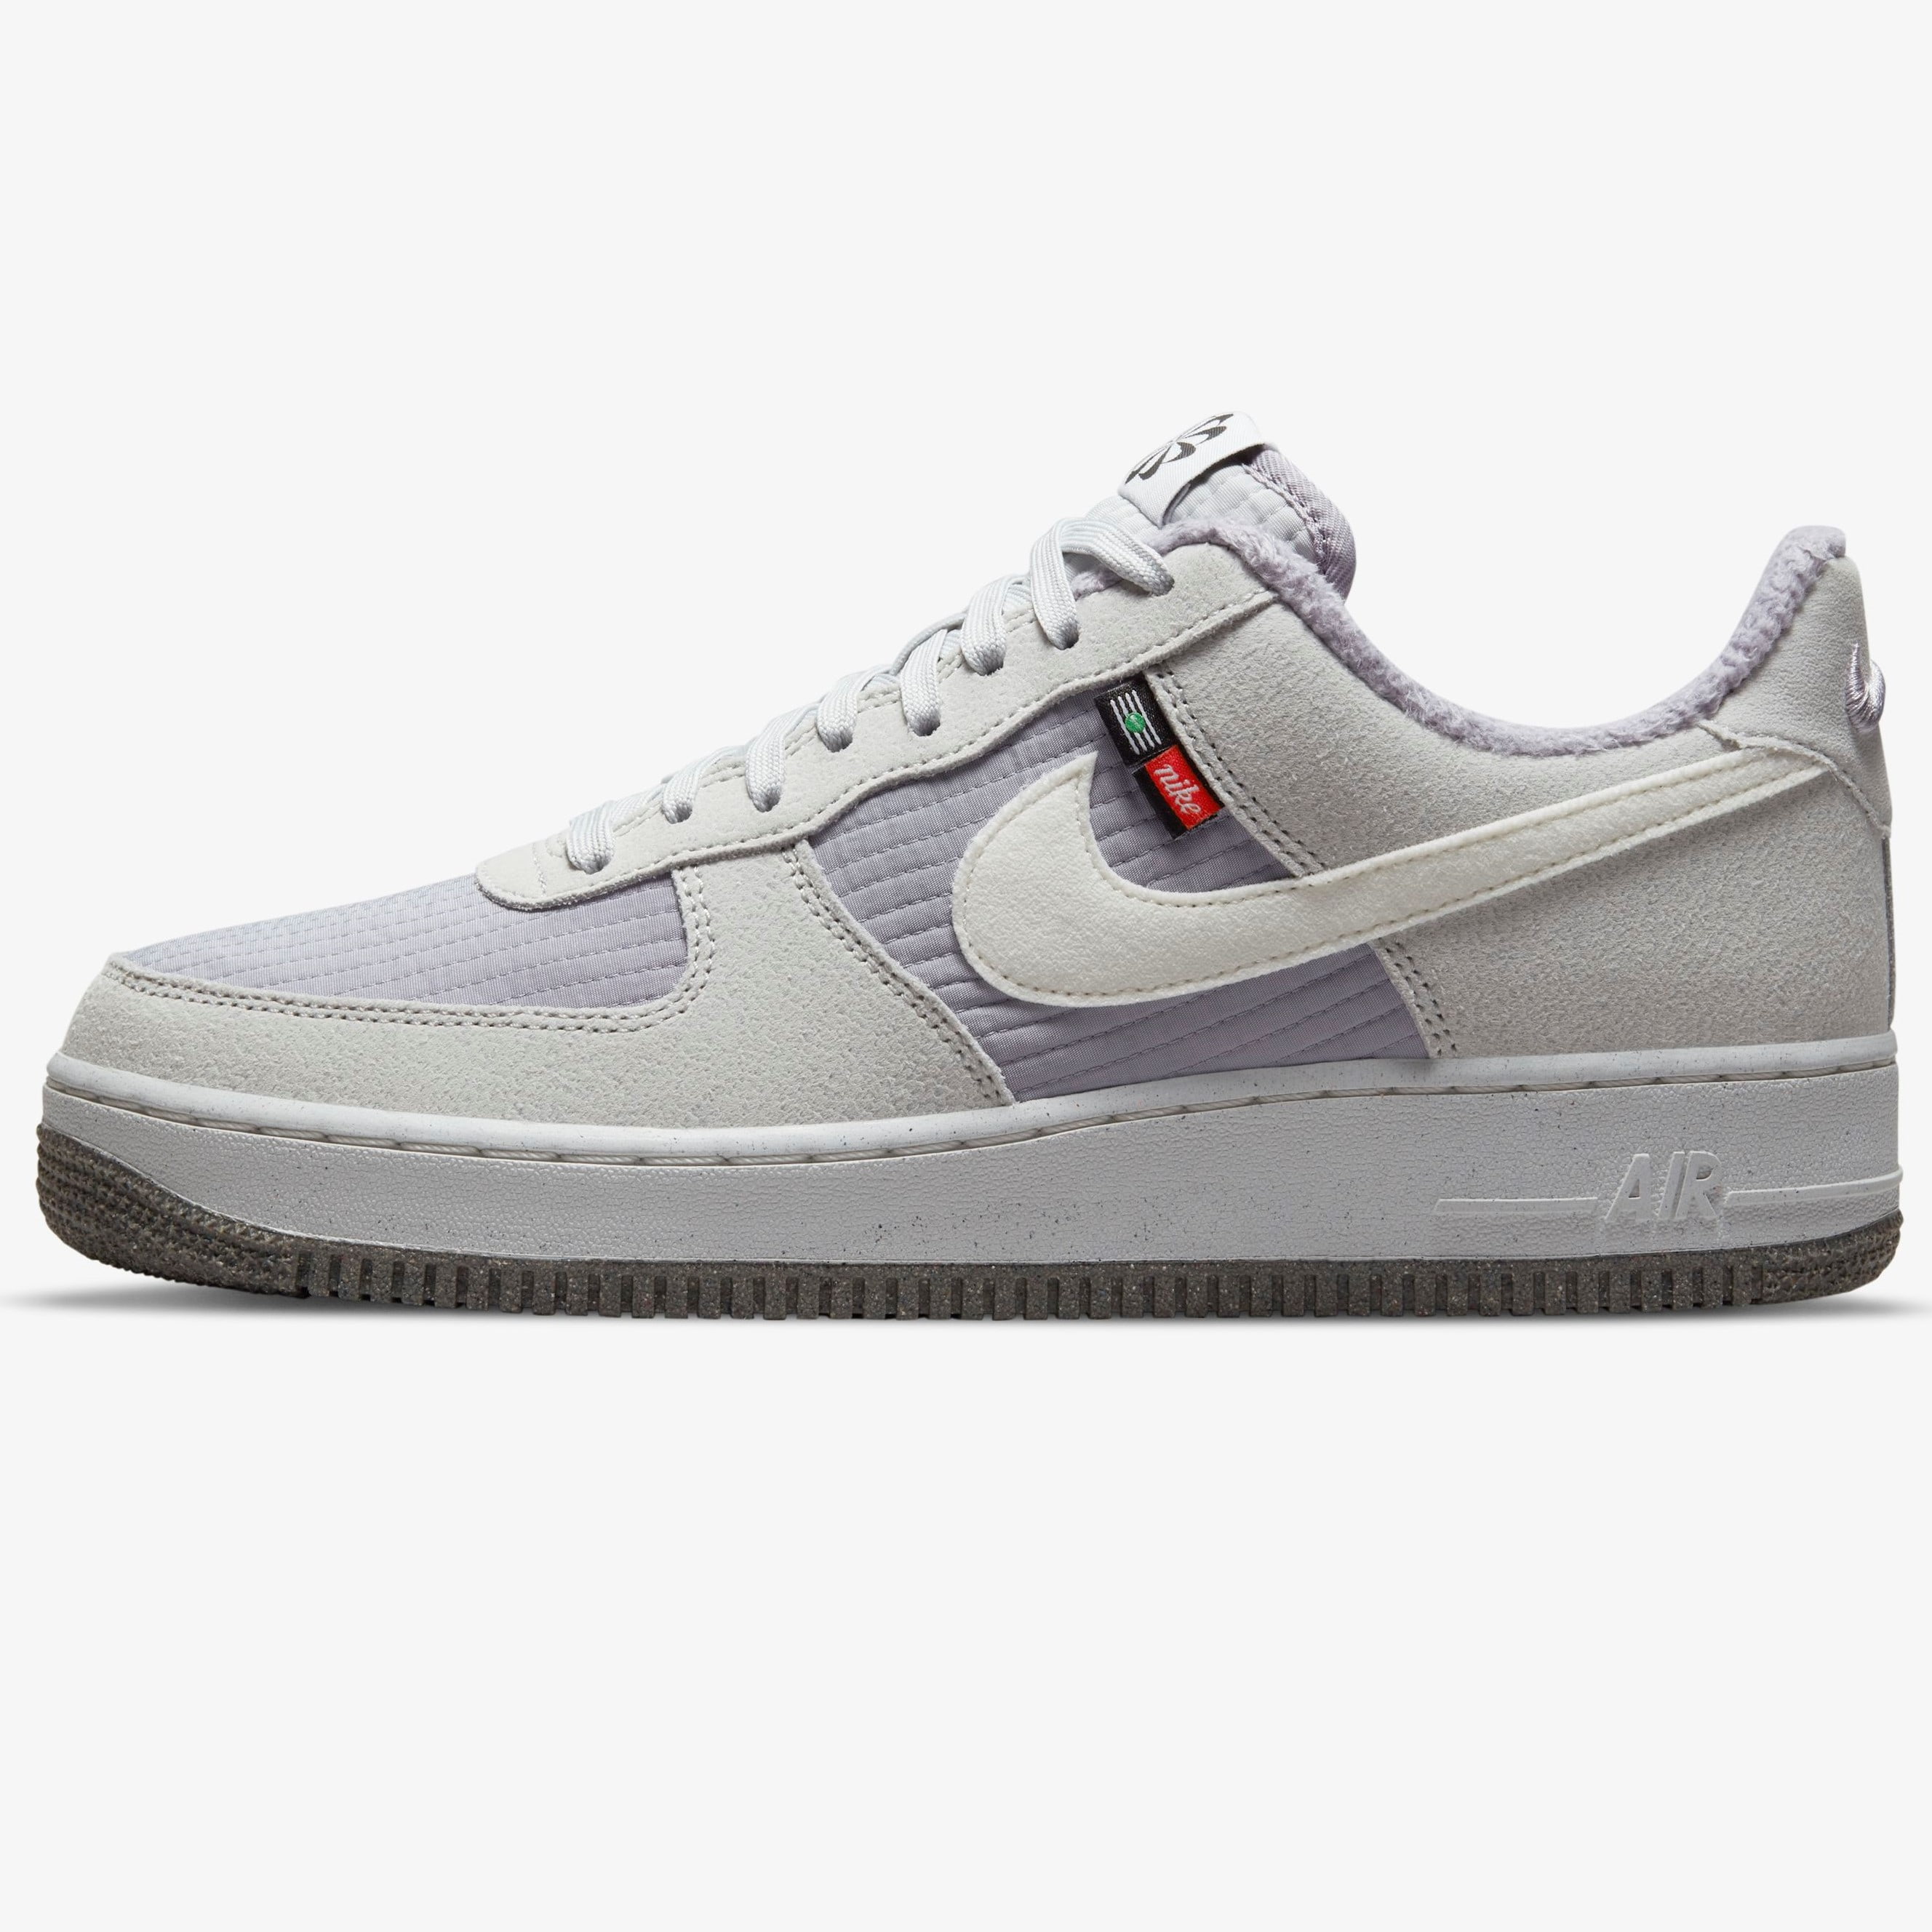 GIÀY THỂ THAO NIKE AIR FORCE 1 LOW TOASTY PURPLE 7